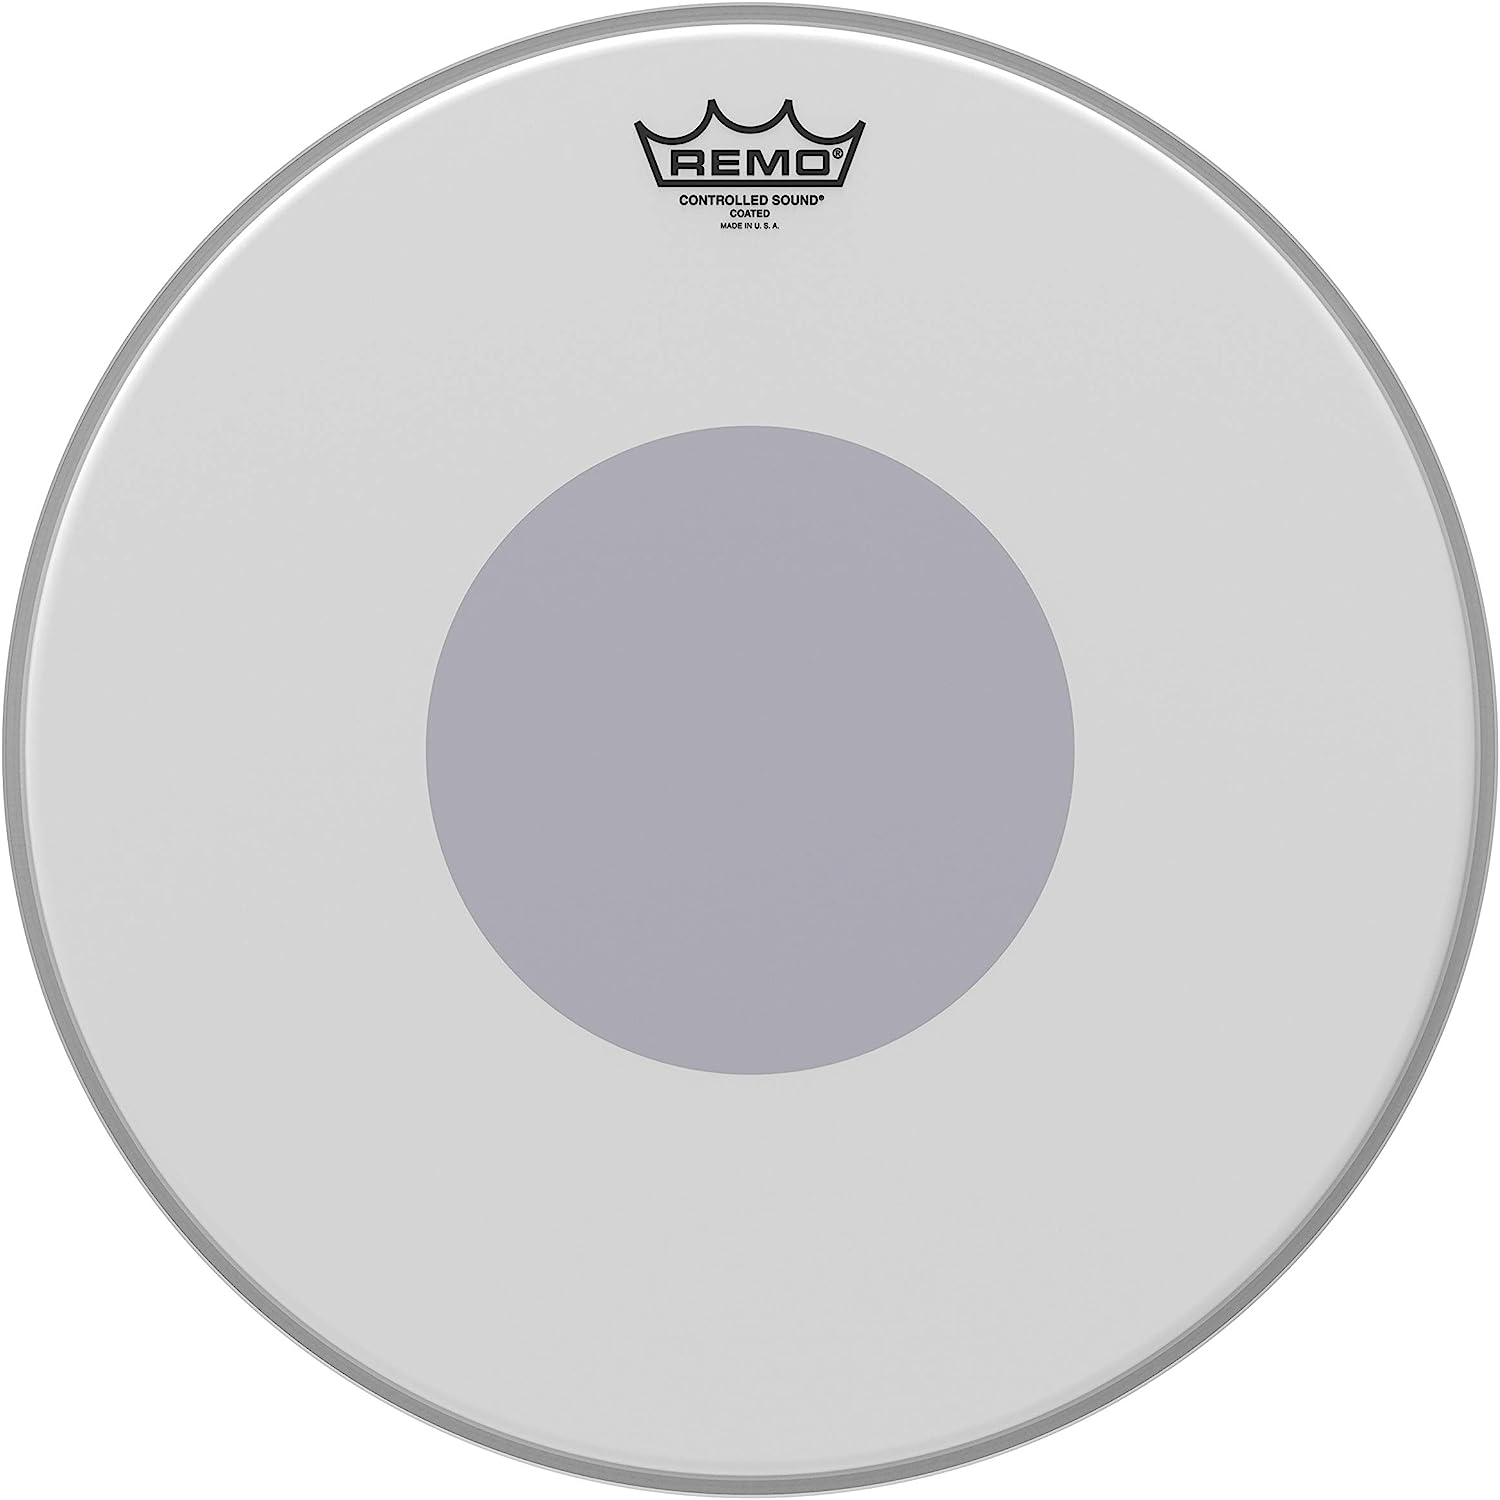 Remo CS-0116-10, Batter, Controlled Sound, Coated, Drum Head - 16 Inch